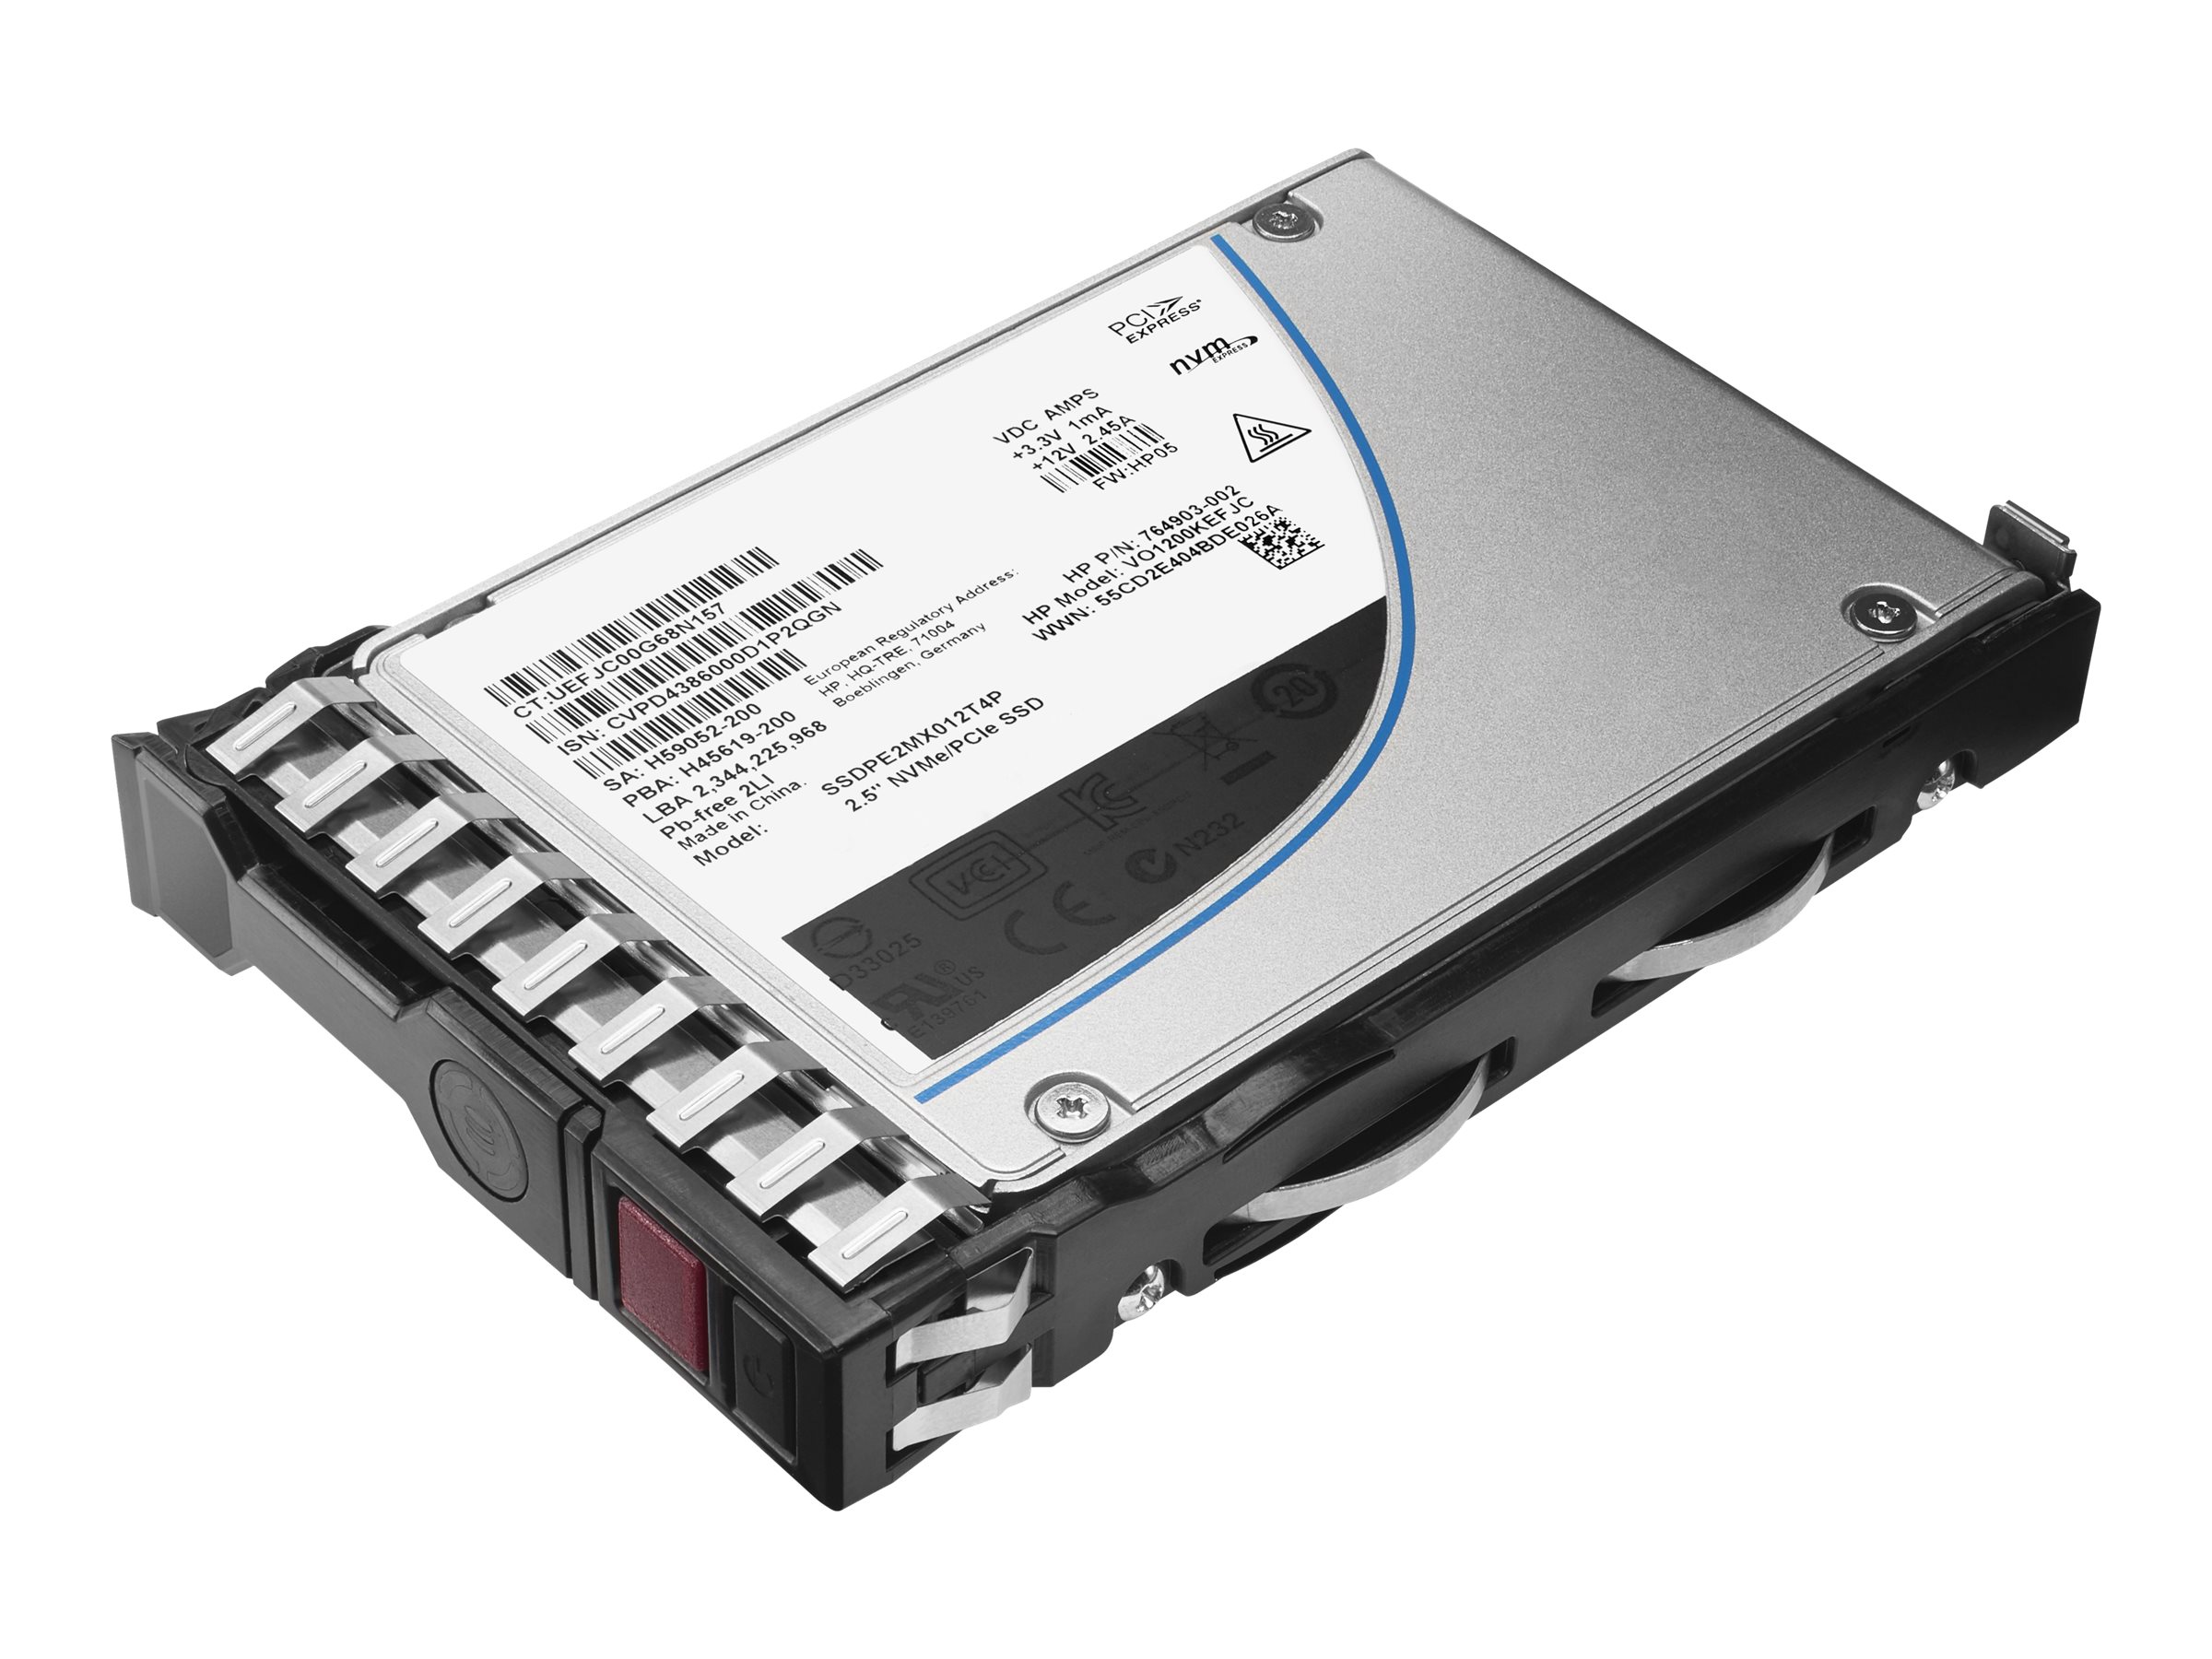 HPE Mixed Use-2 - SSD - 800 GB - Hot-Swap - 2.5